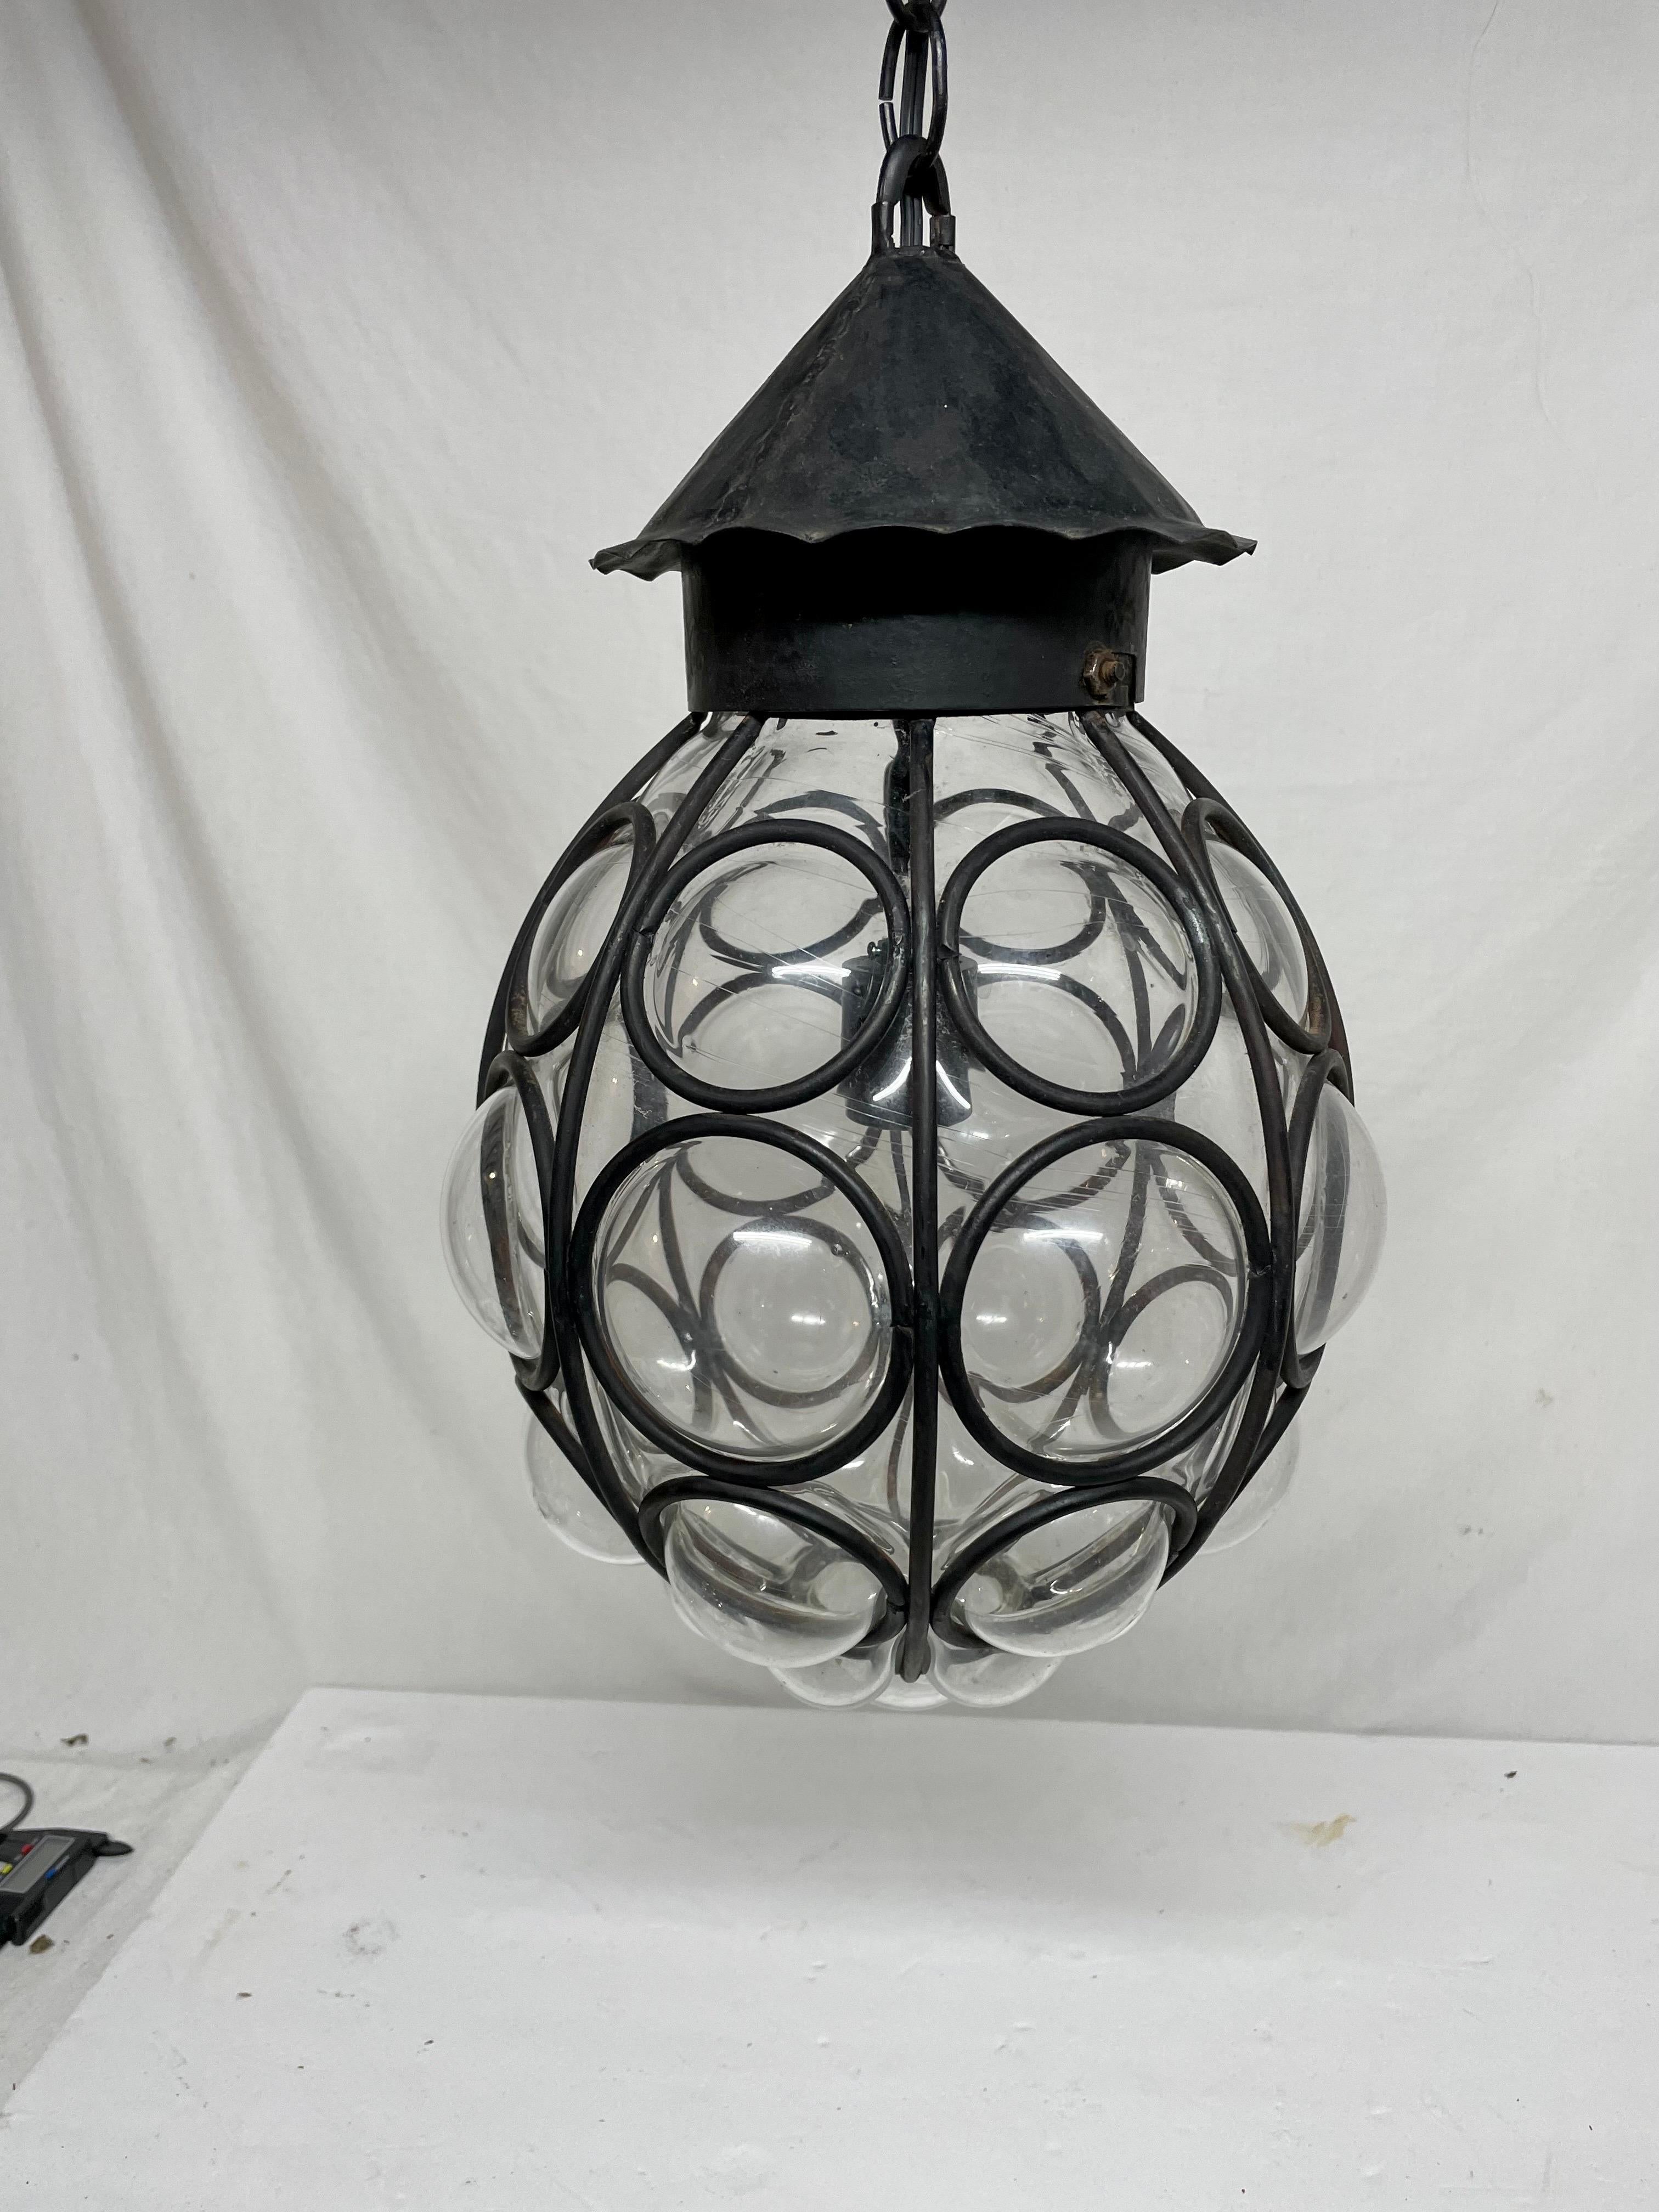 Caged glass lantern with single medium-base (Edison) light. Original black painted wrought iron with transparent glass piece encased by an iron honeycomb style frame. In this style of light the glass is generally hand blown inside the cage to create